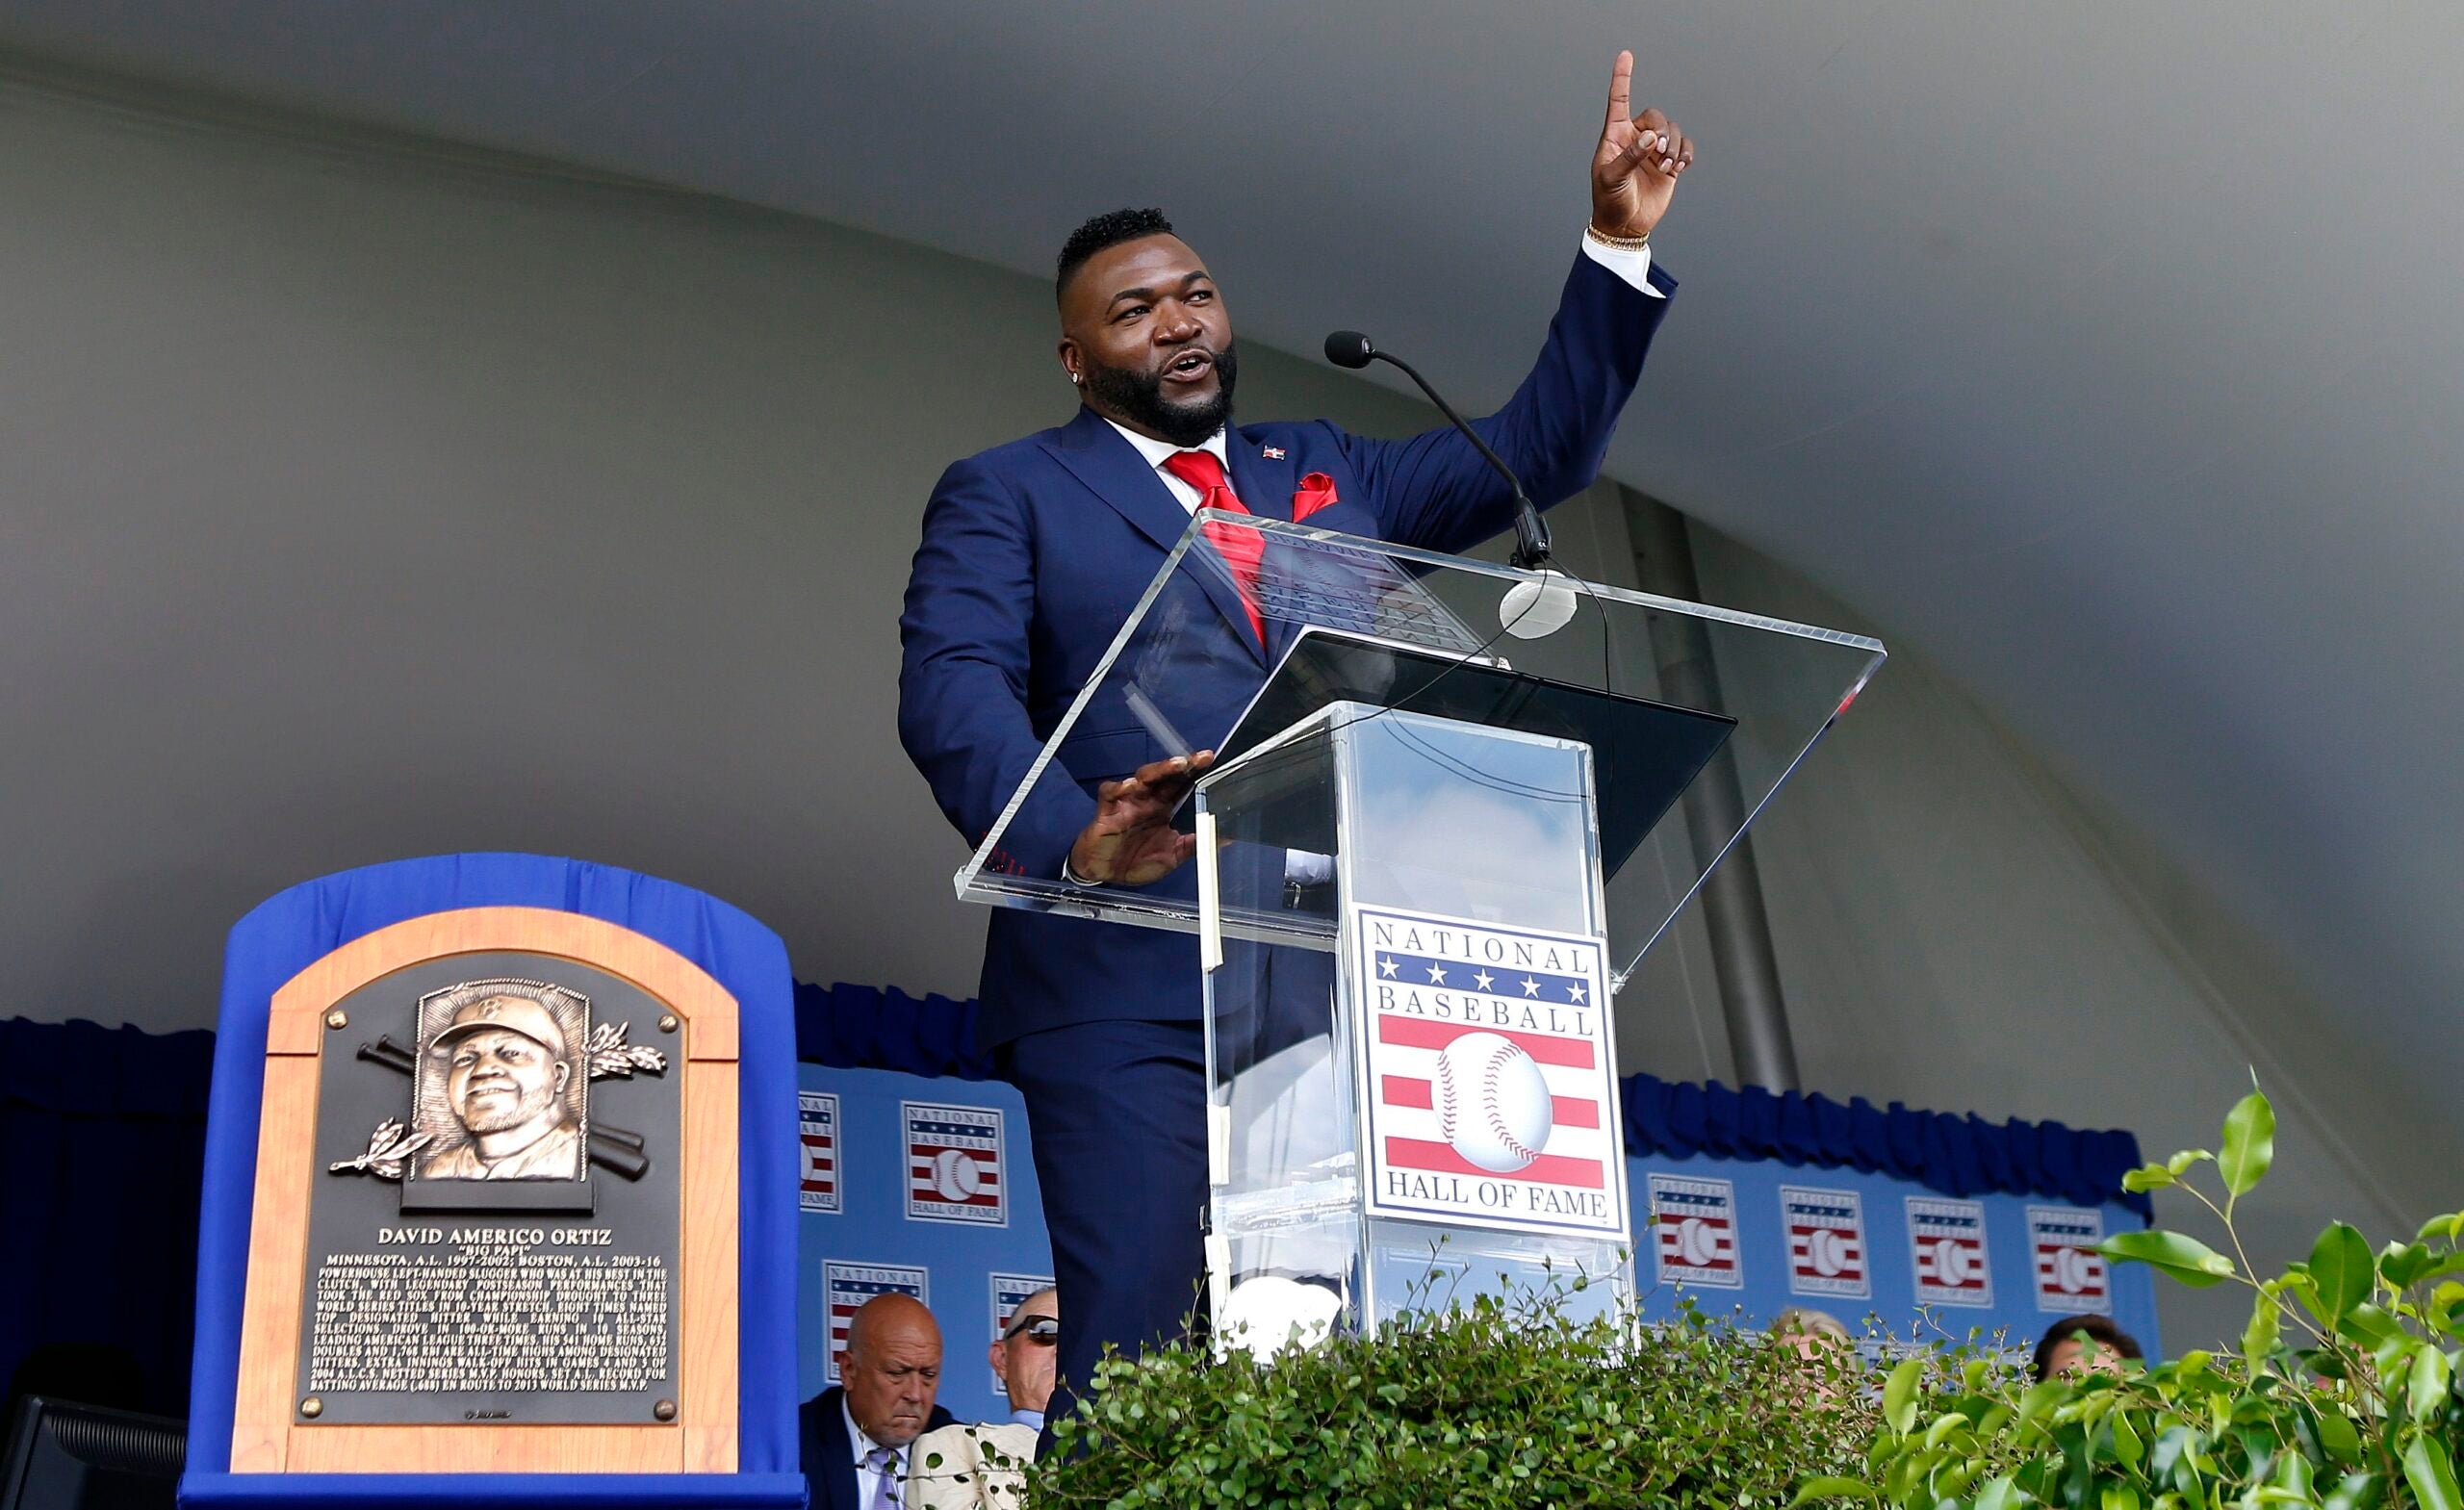 David Ortiz Hall of Fame Induction, Special Sections